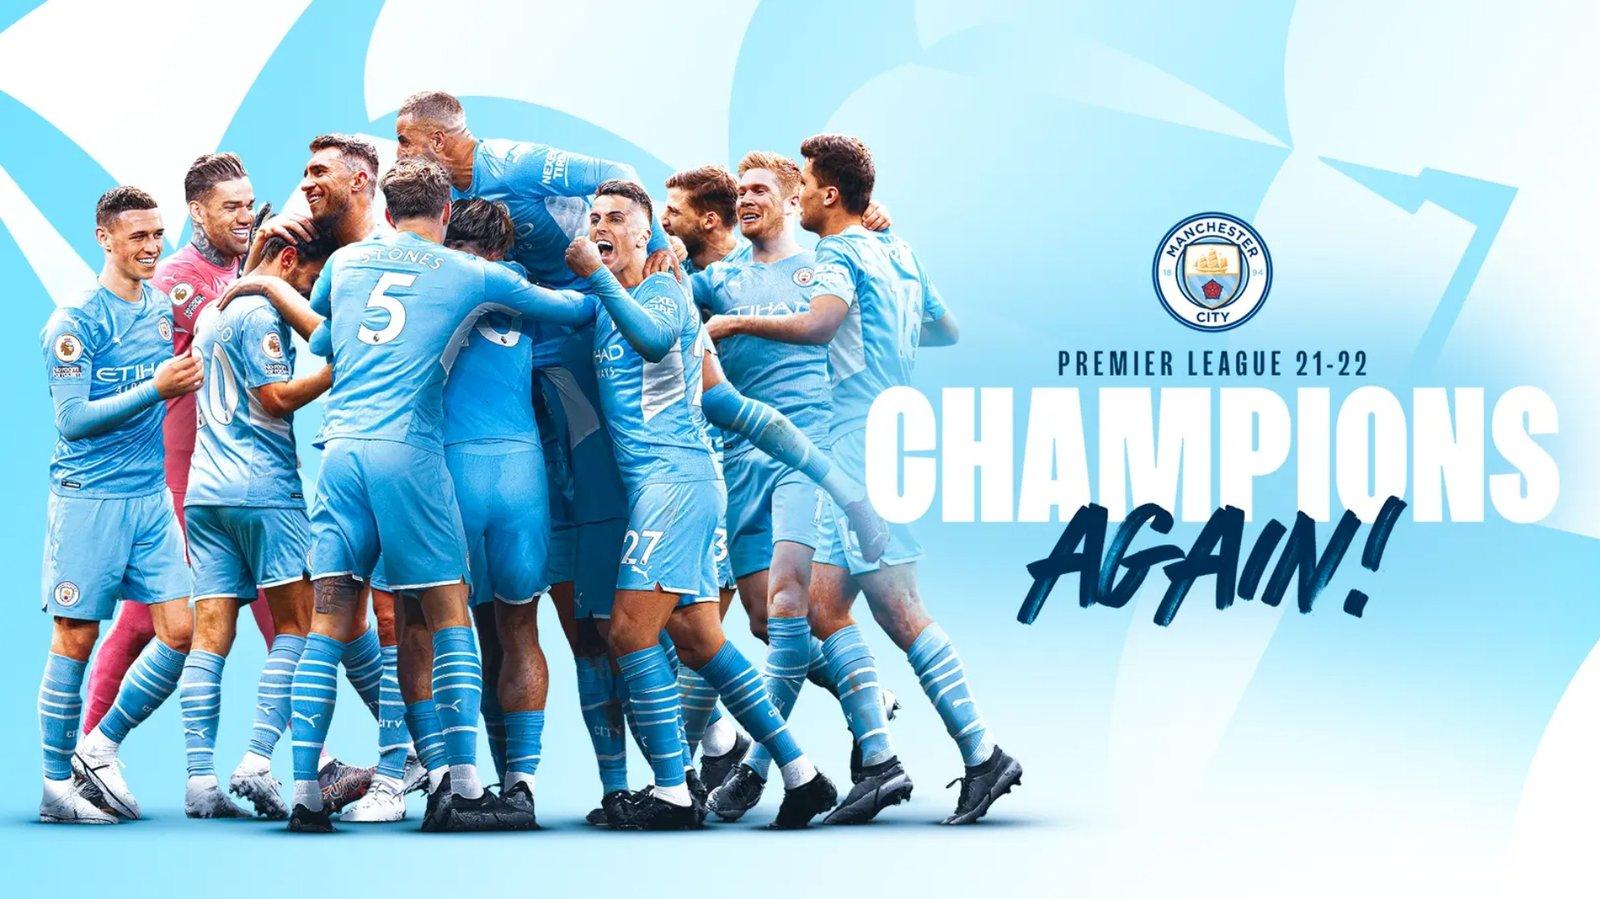 Manchester City FC Wallpapers   Top 35 Best Manchester City FC